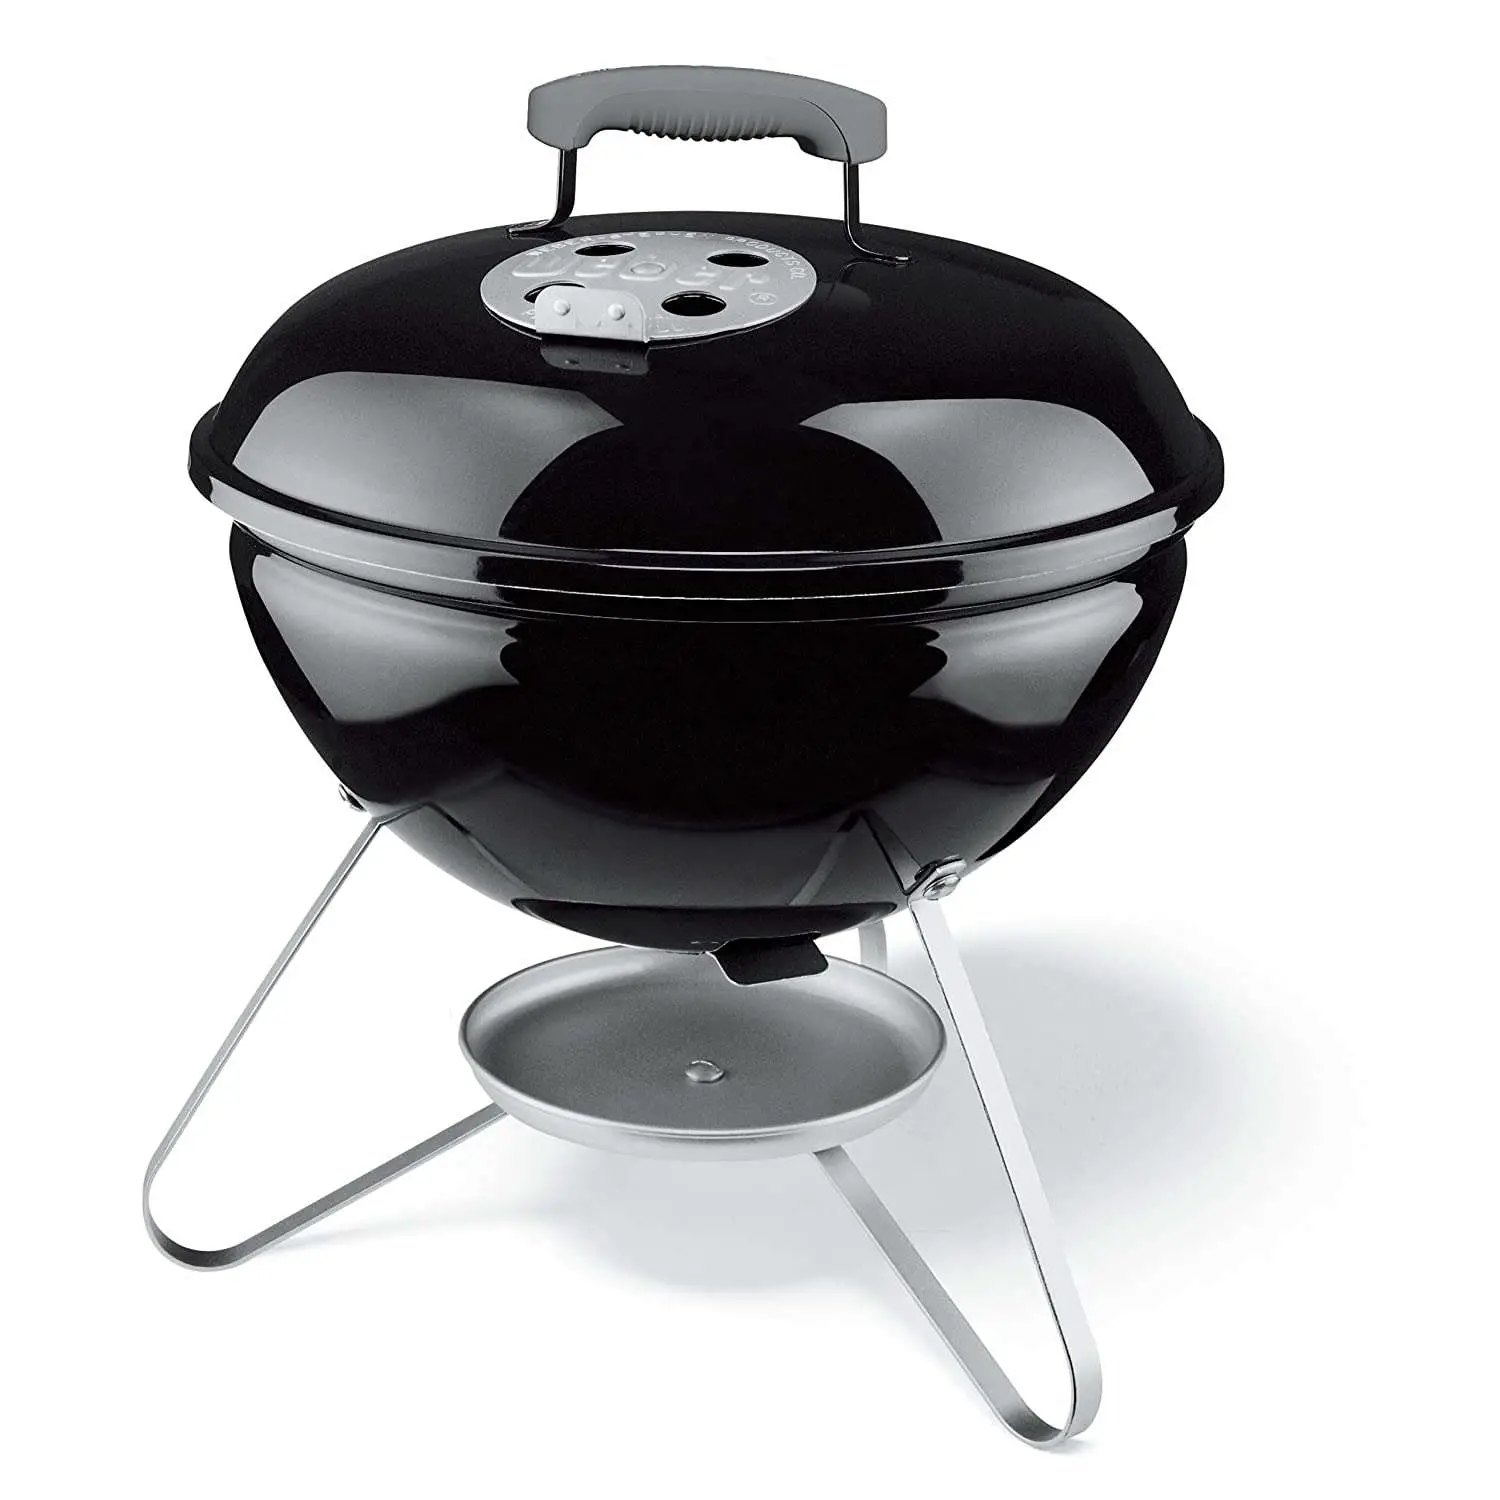 What Are the Best Rated Charcoal Grills?